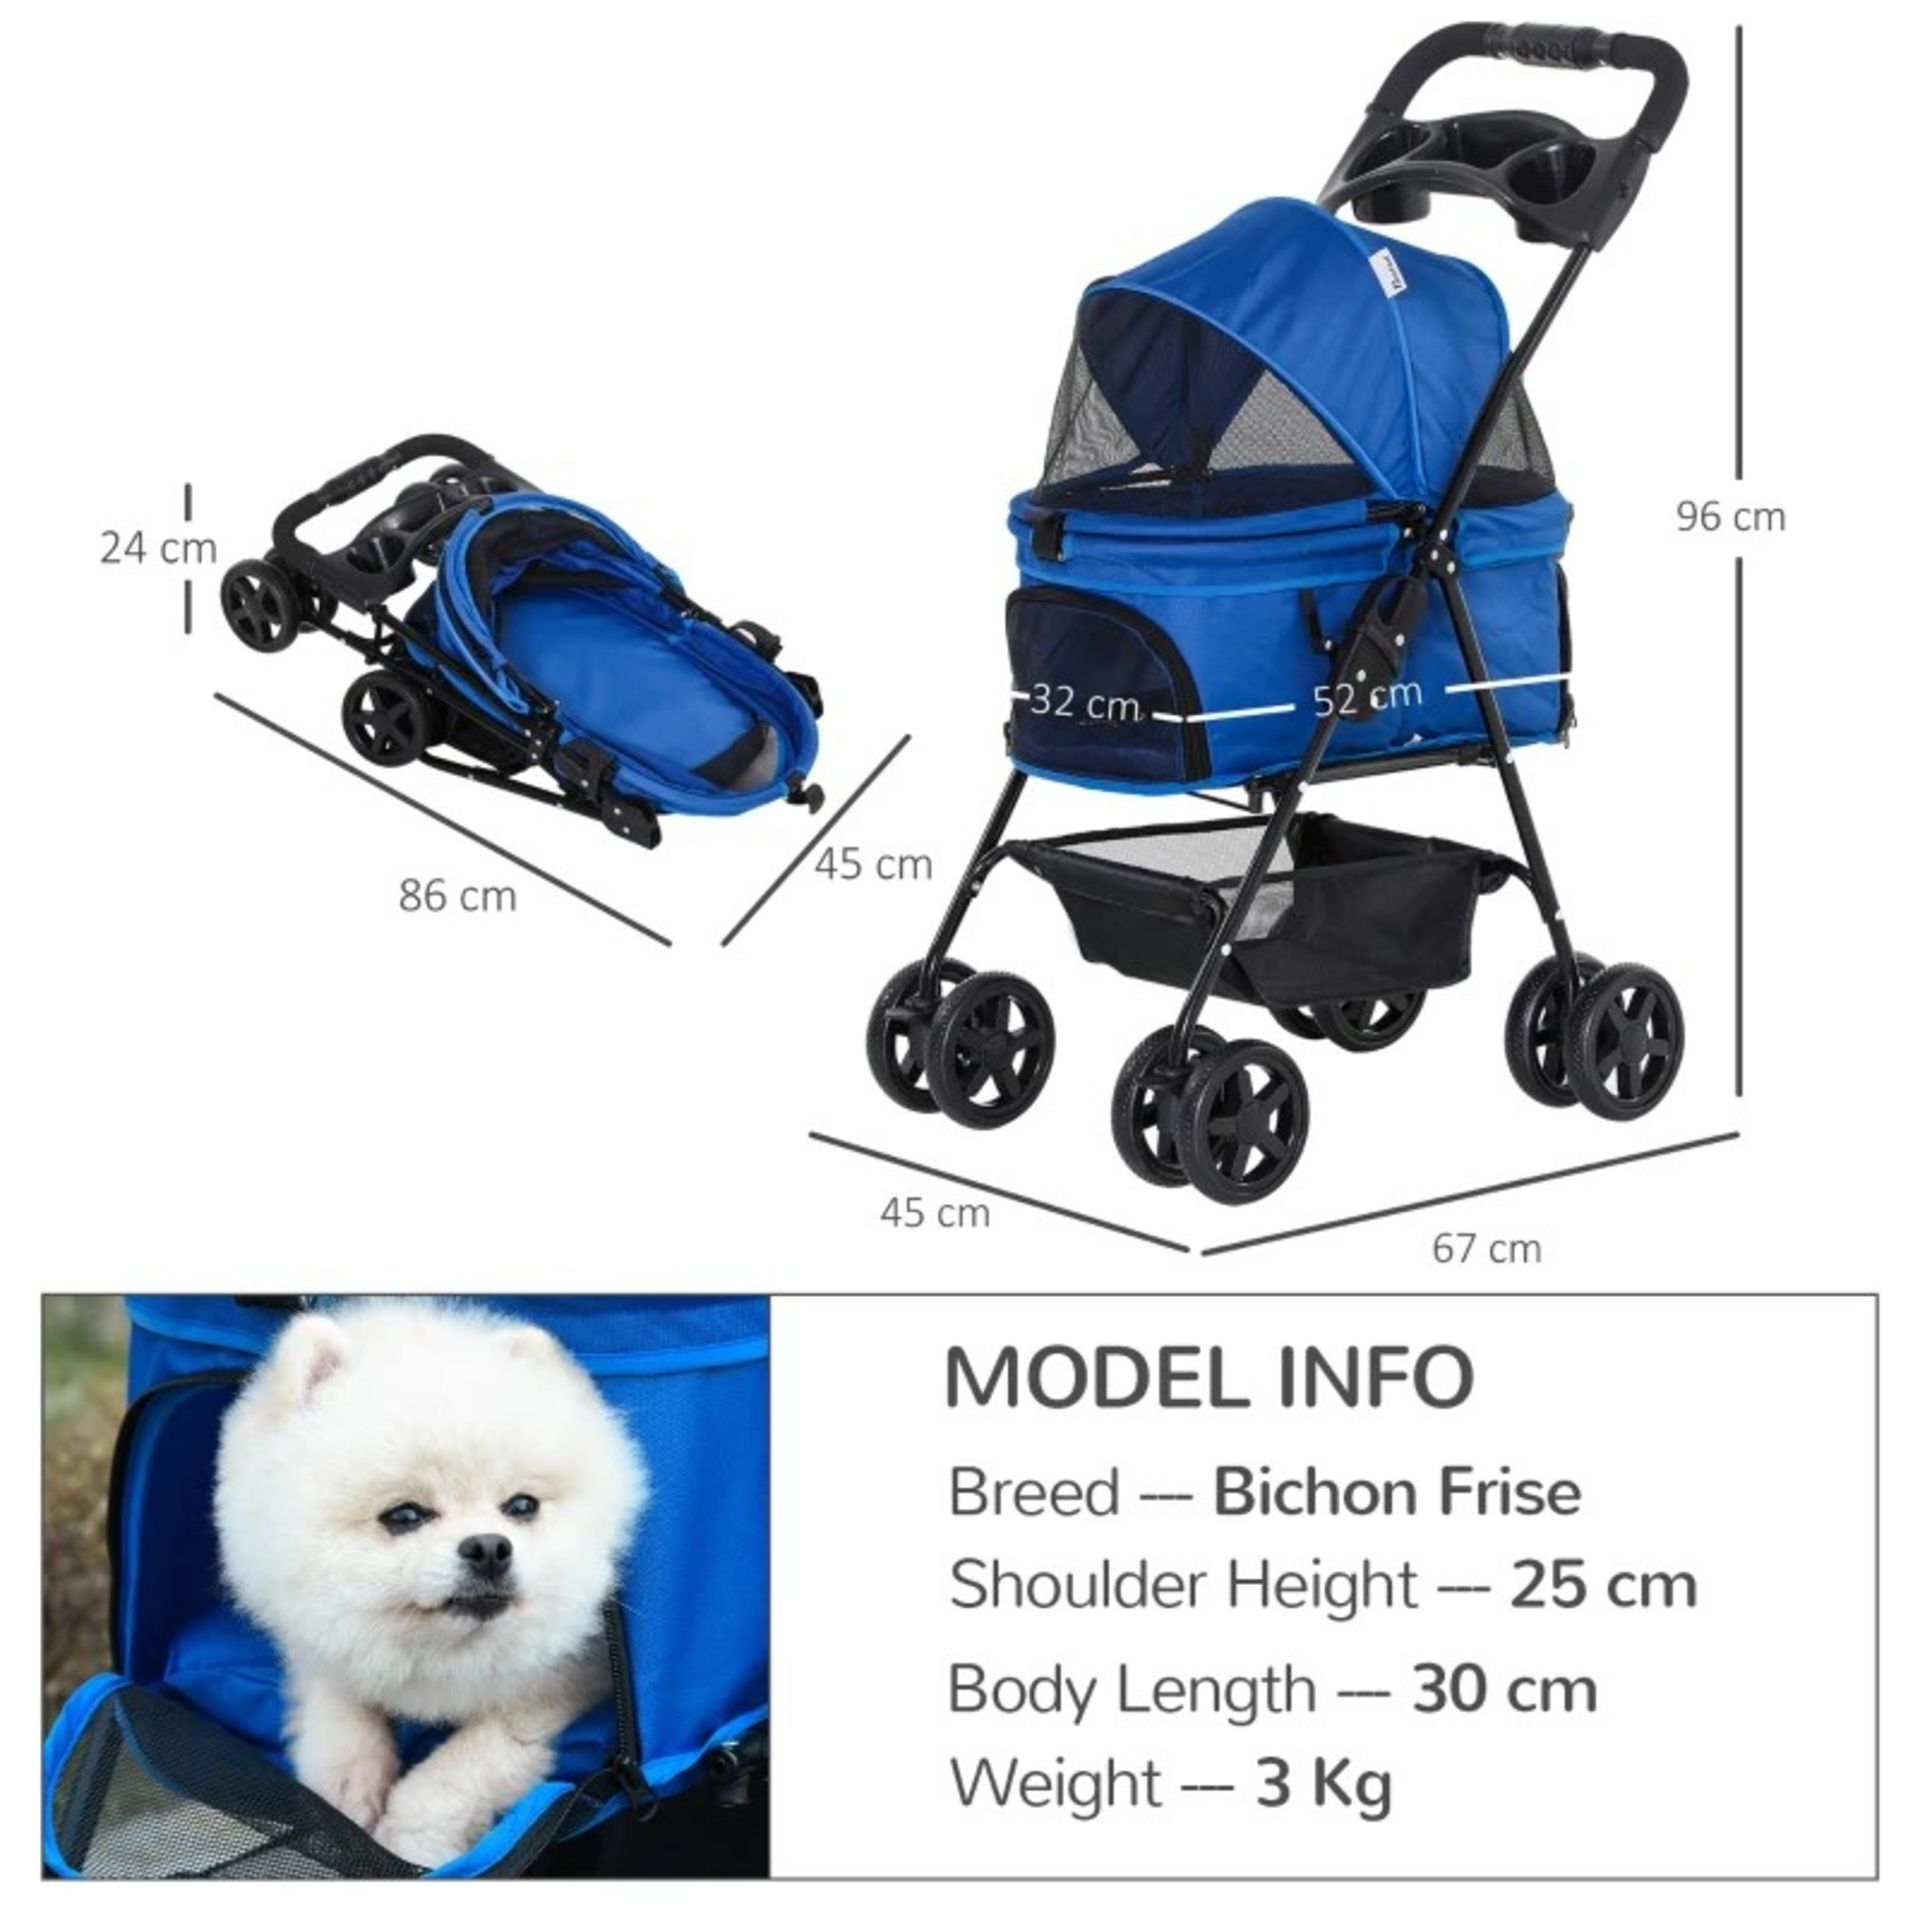 RRP £169.99 - PawHut Pet Stroller Pushchair No-Zip Foldable Travel Carriage with Brake Basket - Image 2 of 4